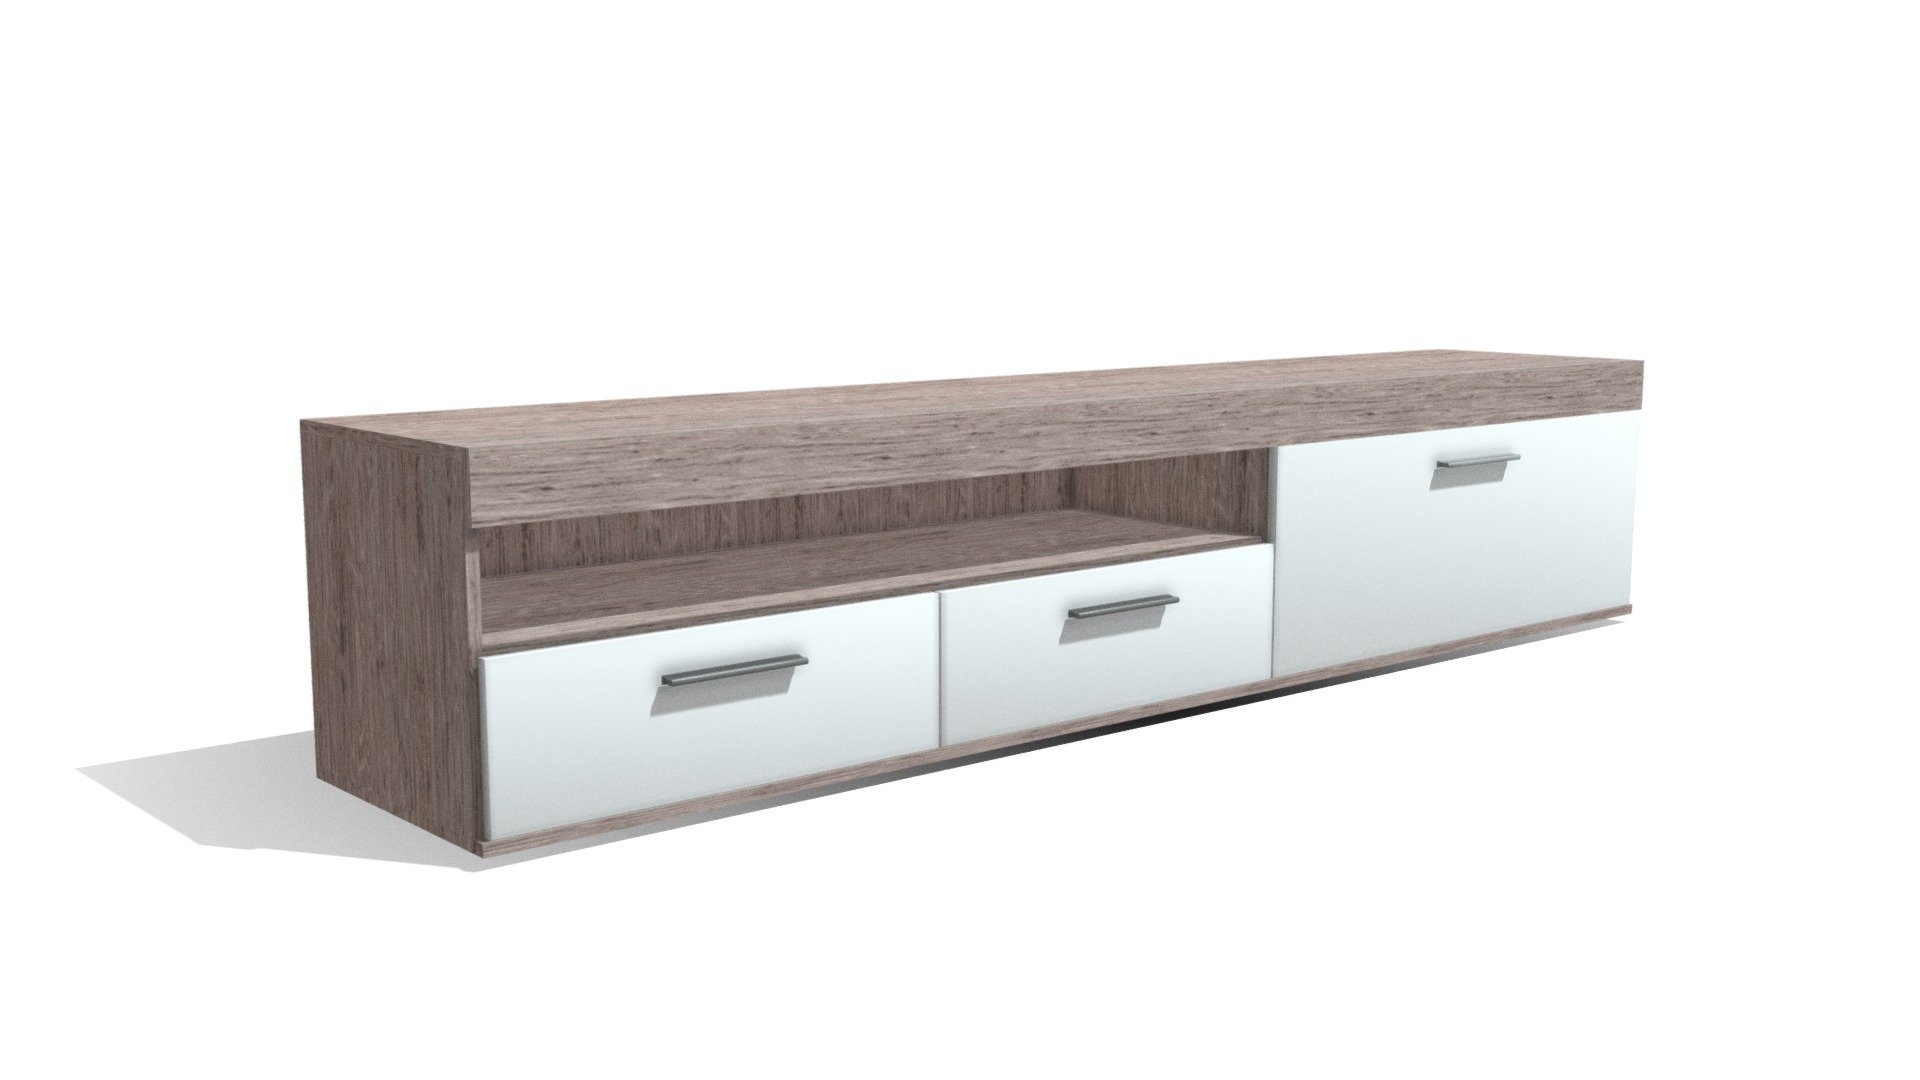 This modern TV shelf has enough room for your gaming console, BluRay player, record player, amplifier, a 45